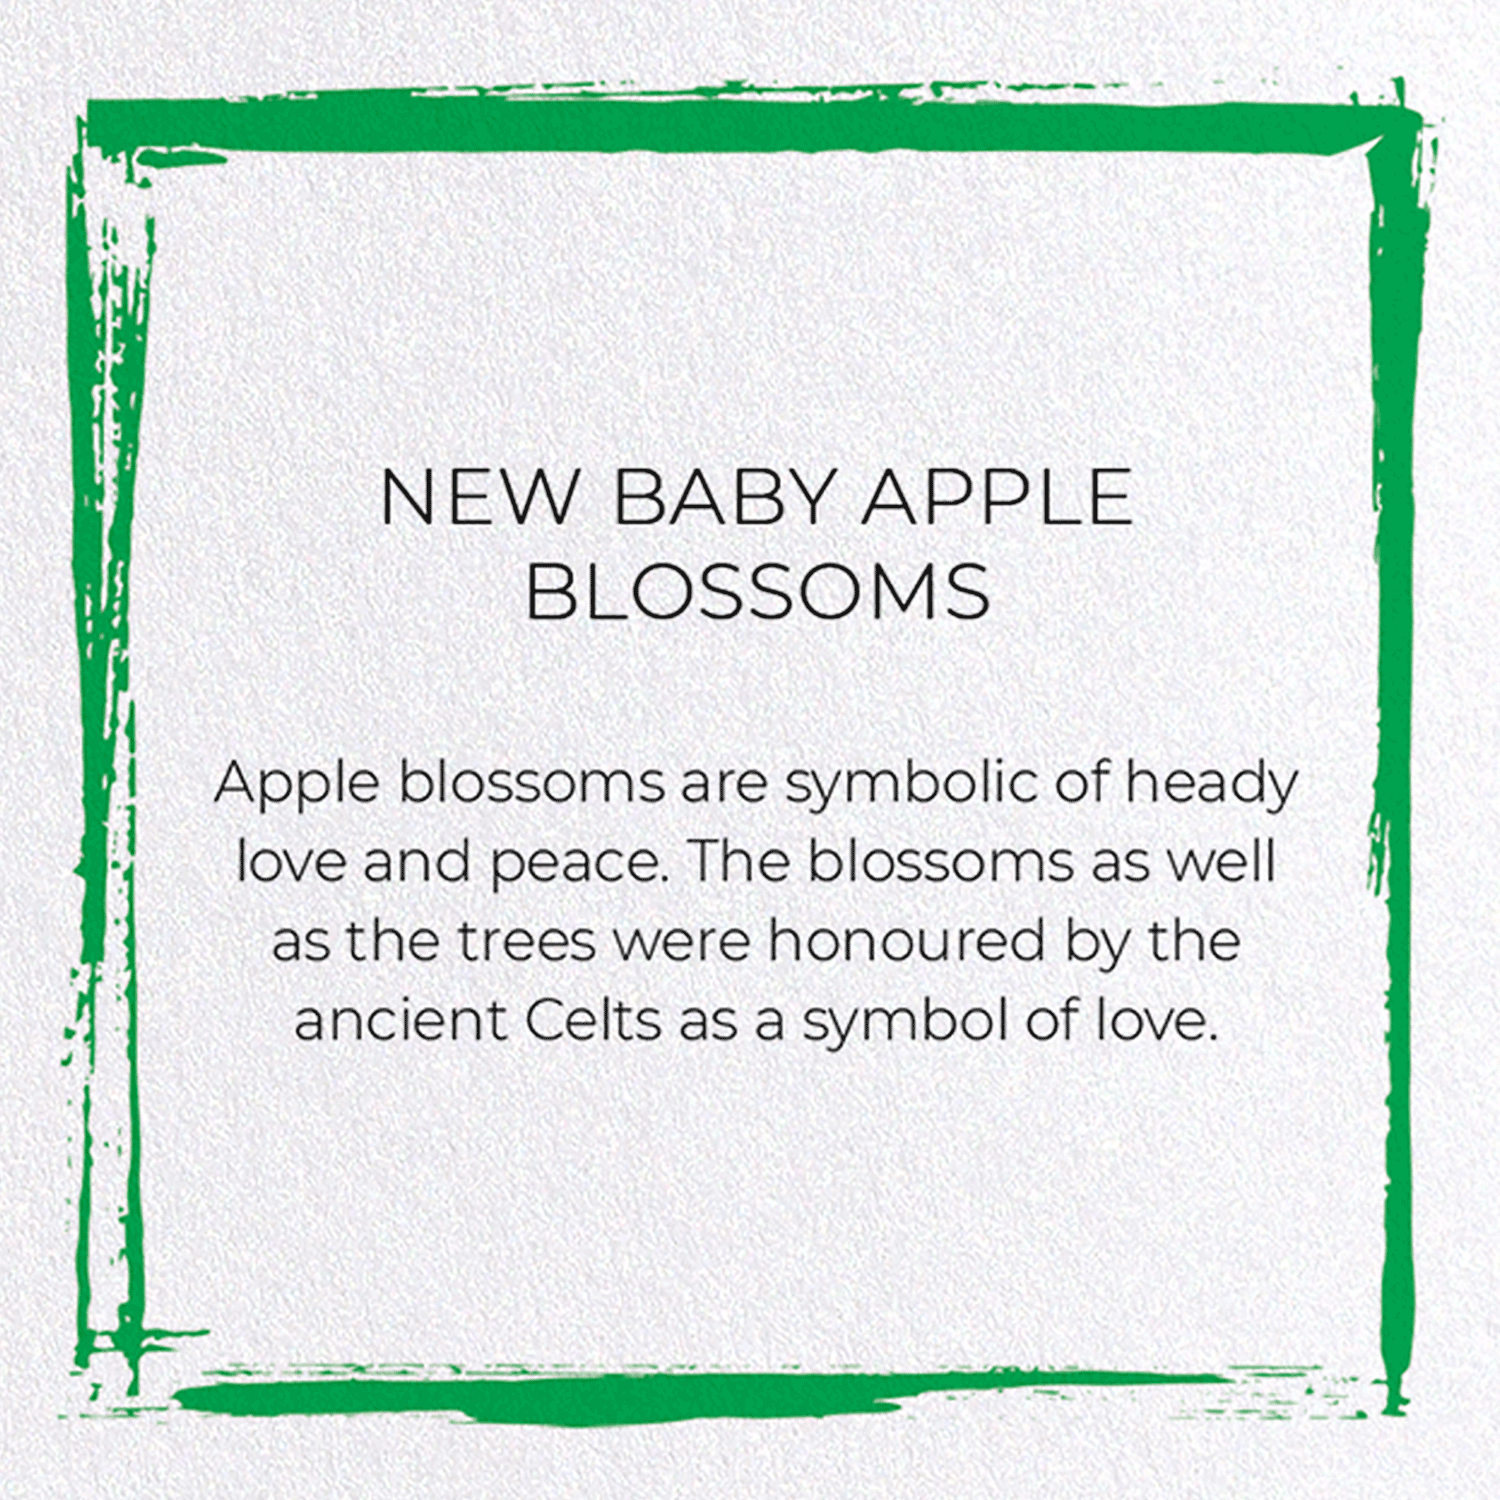 NEW BABY APPLE BLOSSOMS